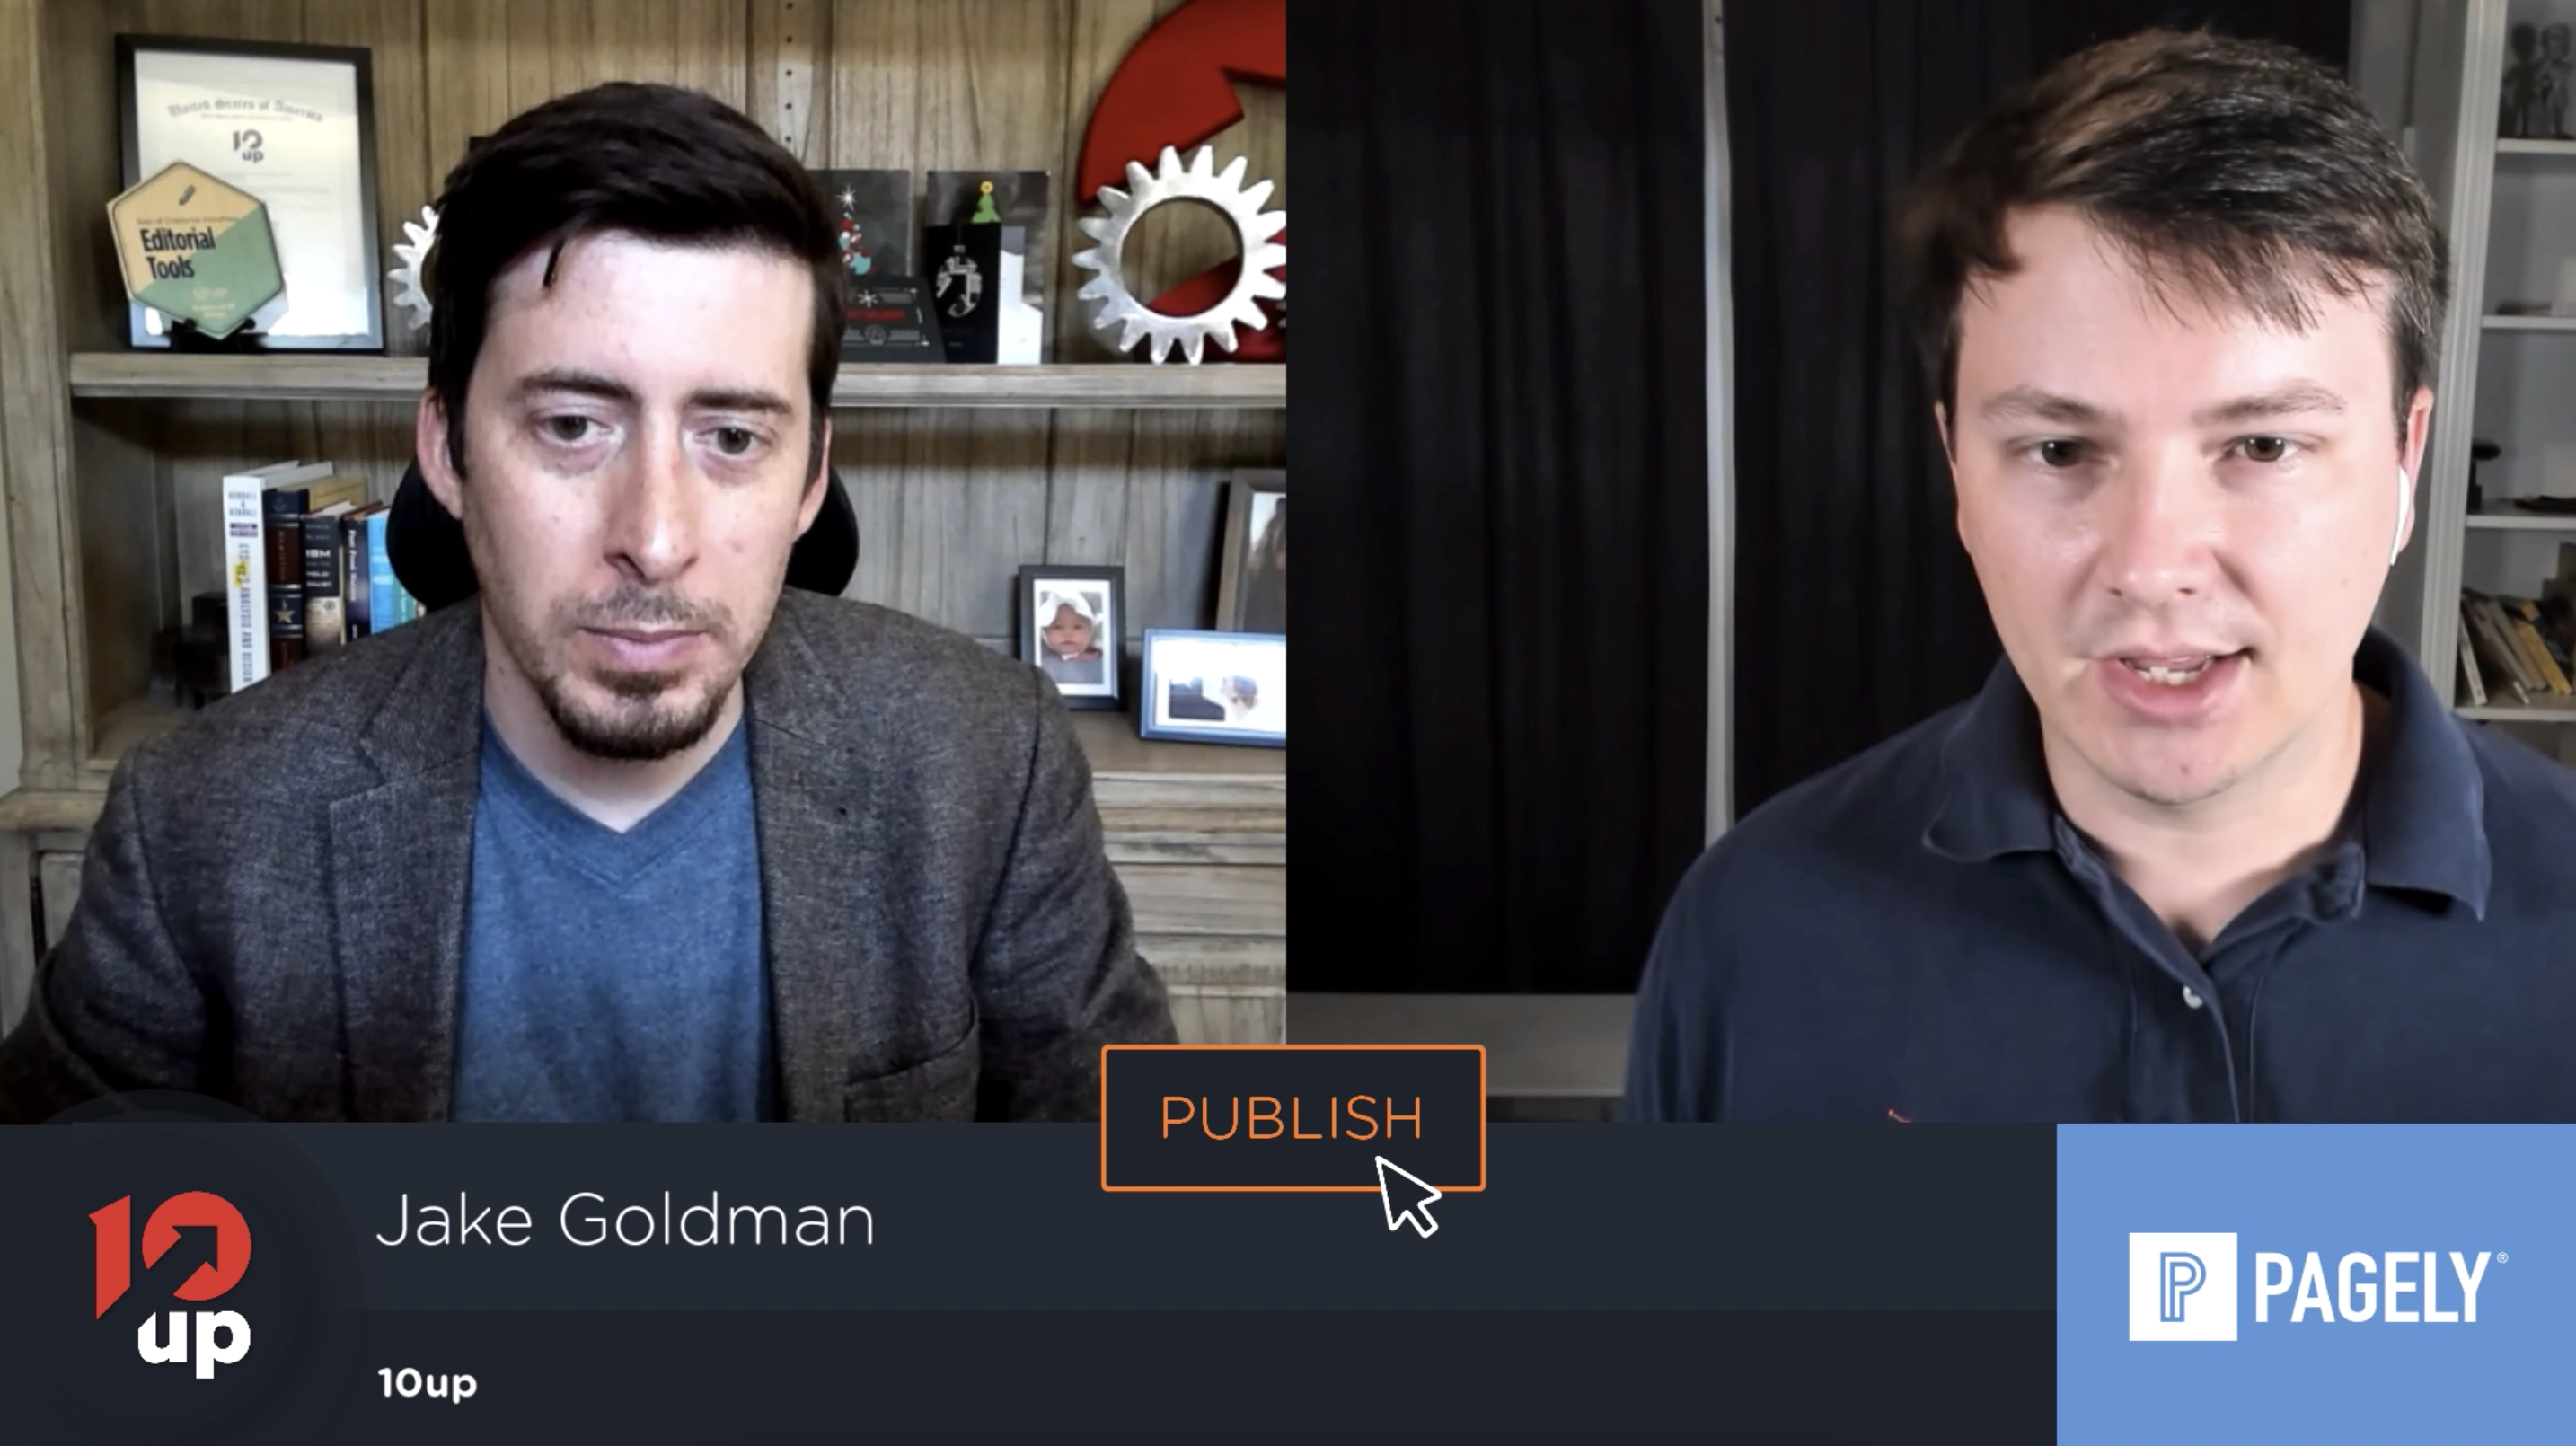 Web experience consulting in 2019, with 10up Founder Jake Goldman